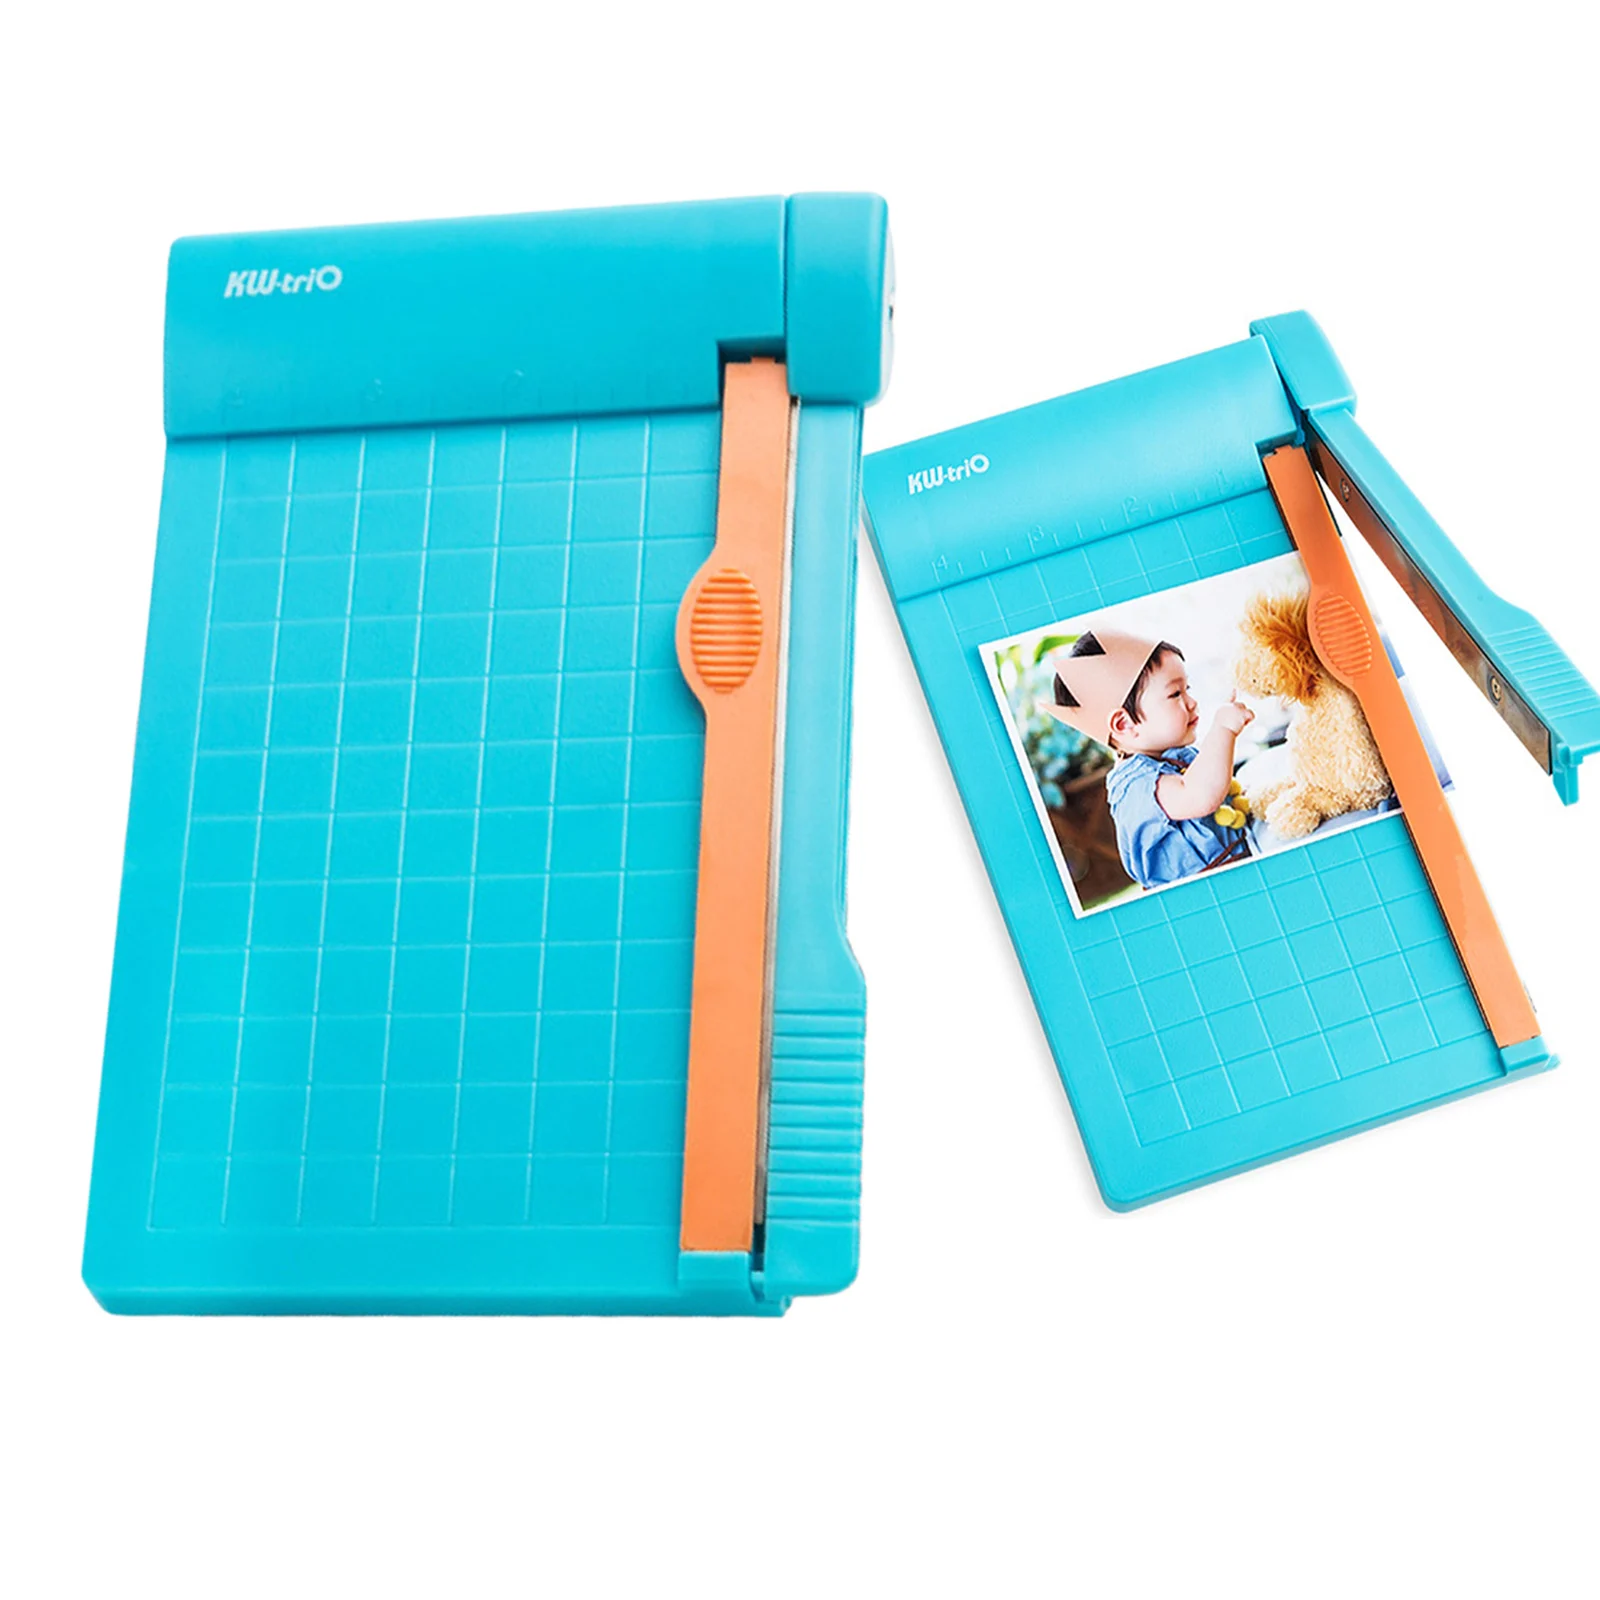 Portable Precision 6inch Paper Trimmer Cutting Board Guillotine Photo Cutter Photo Coupon Laminated Paper Craft Project Office